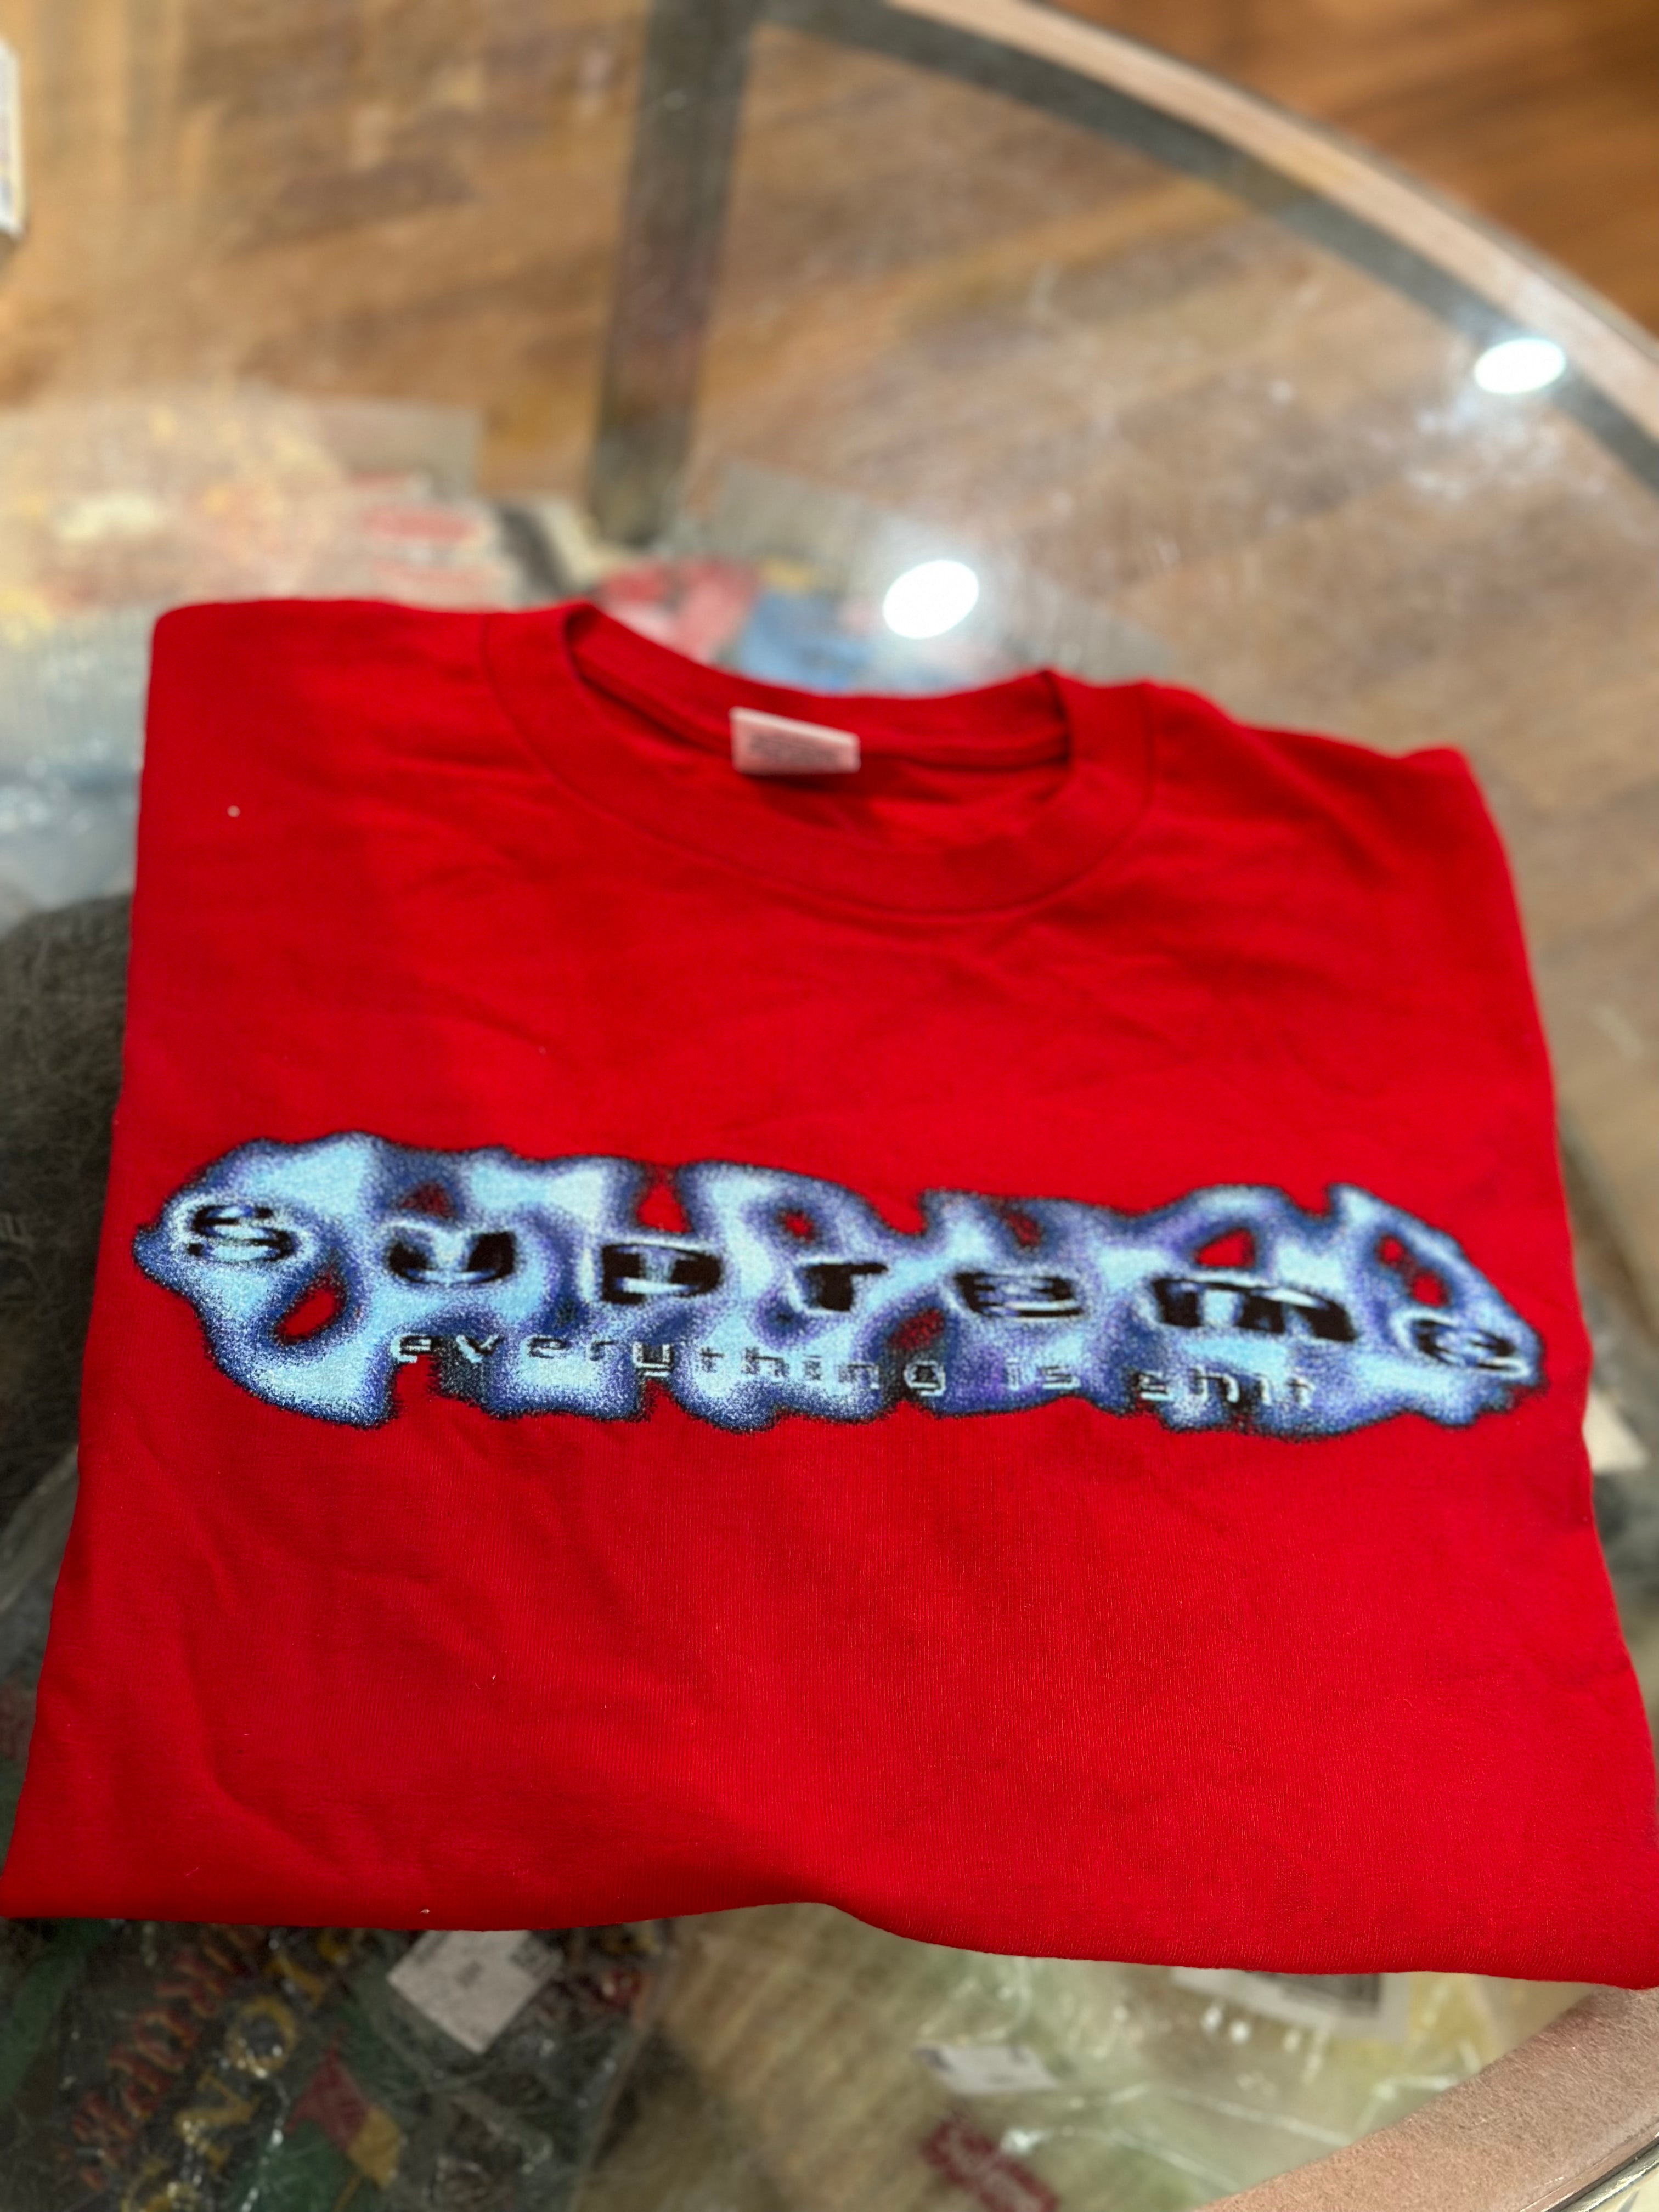 Supreme Red Limited Edition 3D T-Shirt